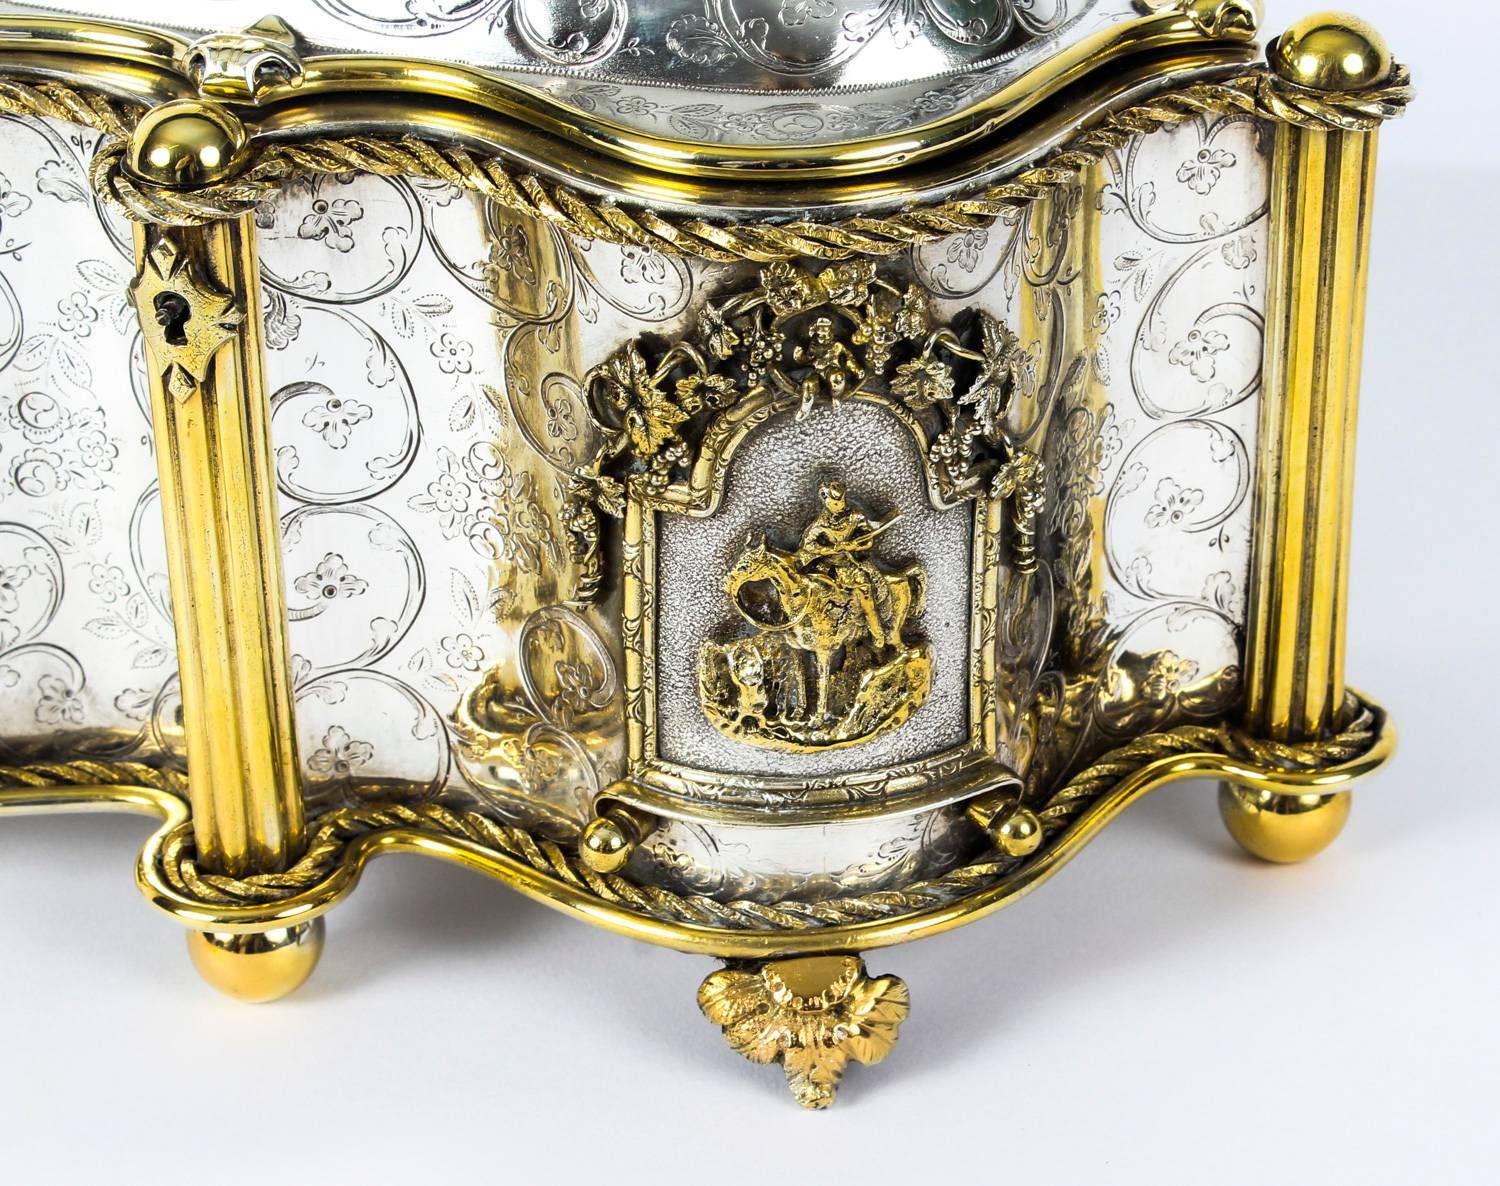 Late 19th Century Antique Large French Gold and Silver Plated Oval Casket 19th Century